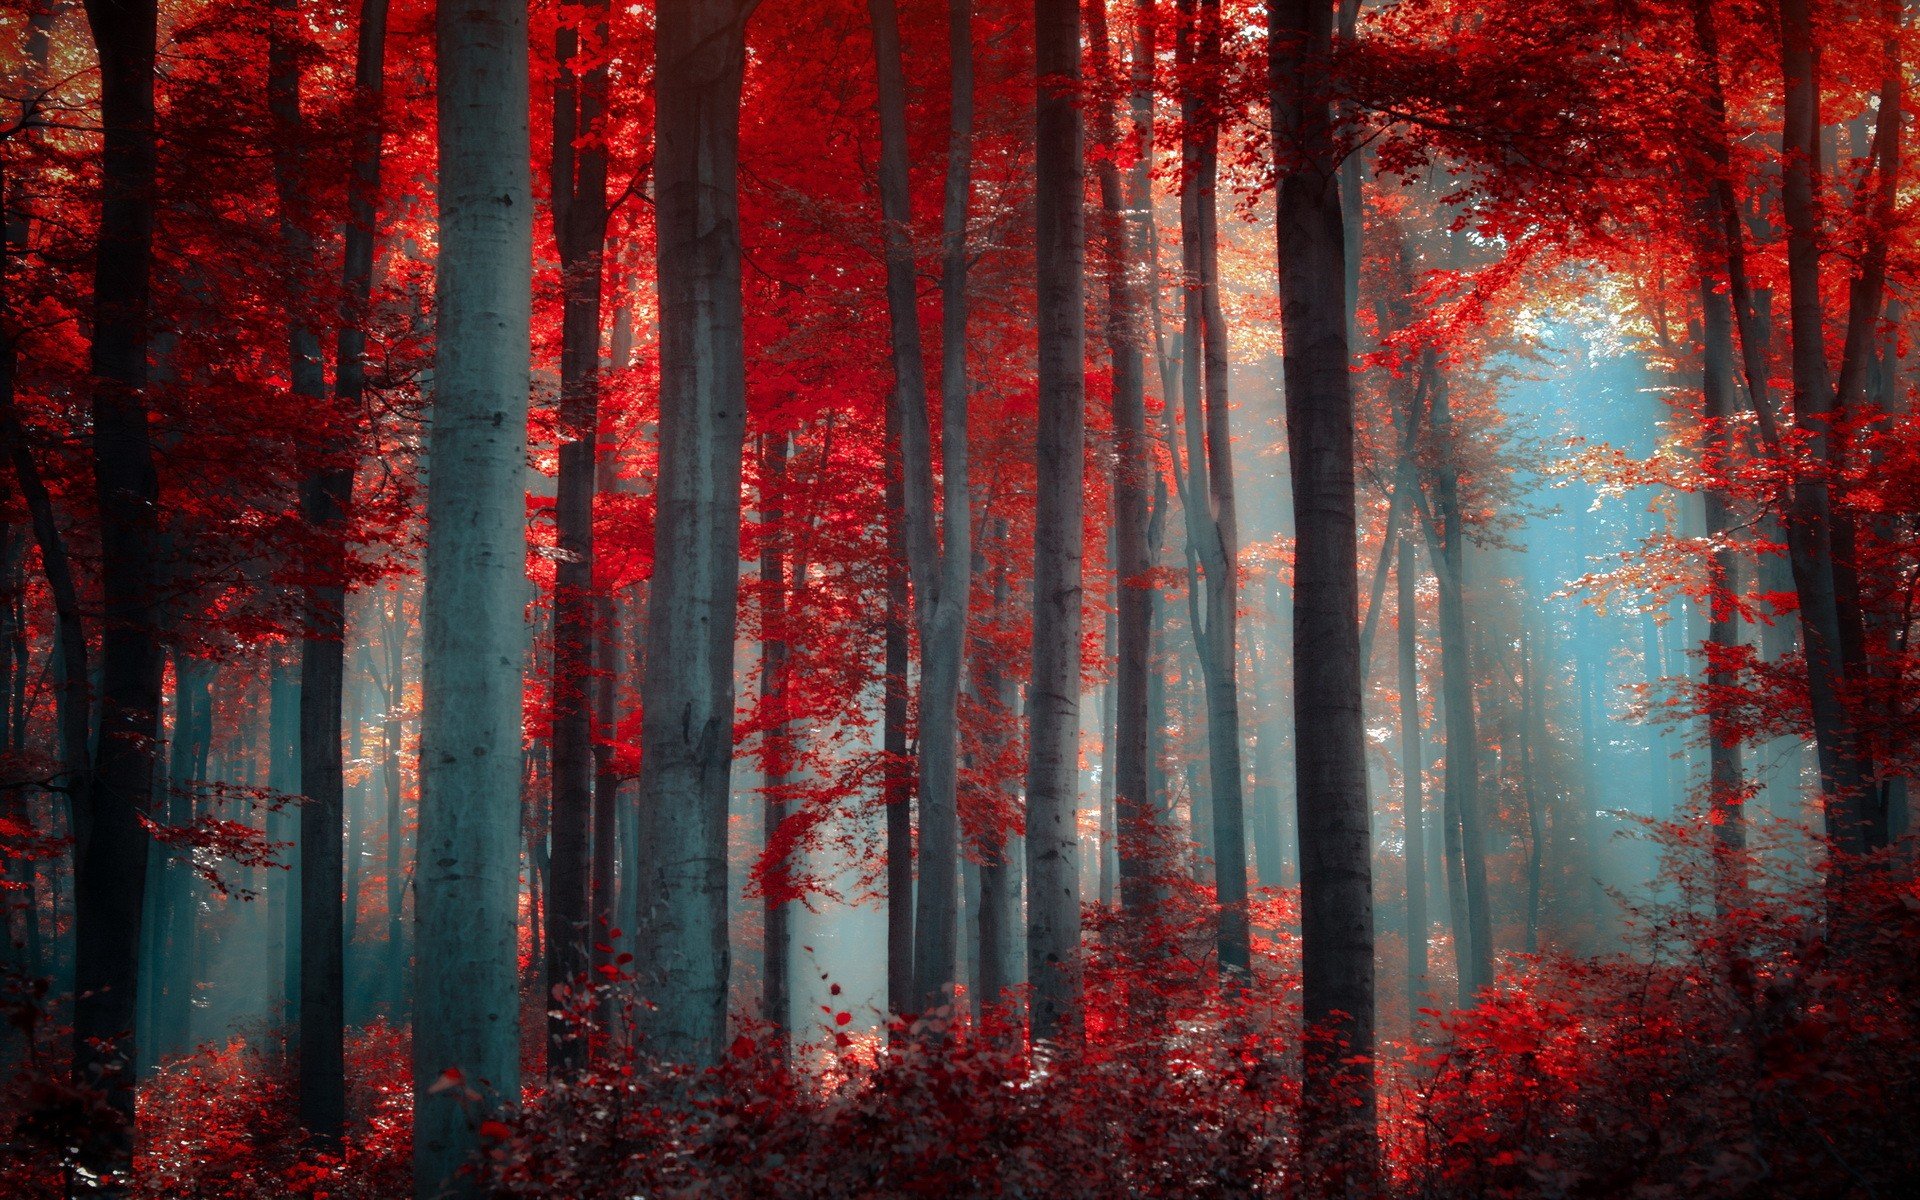 Trees in the forest with red leaves